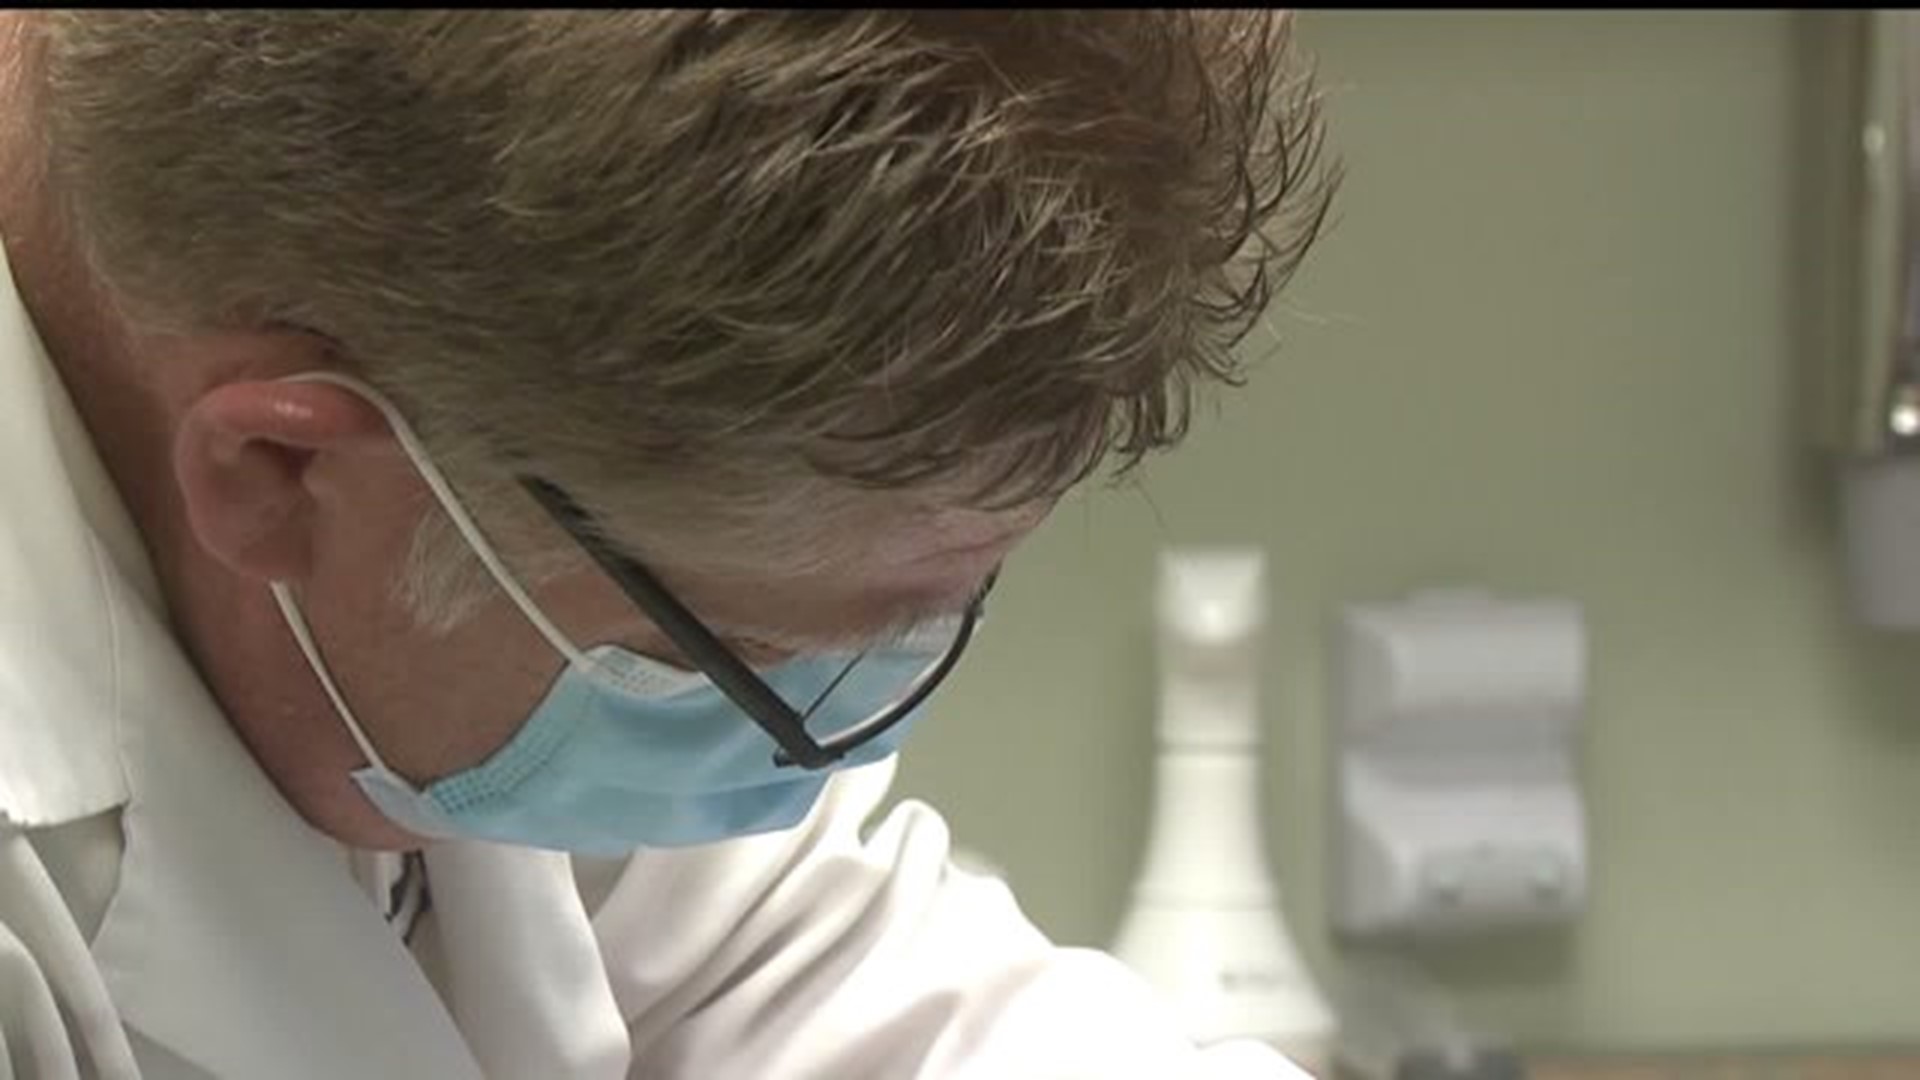 Vets get free dental care for a day